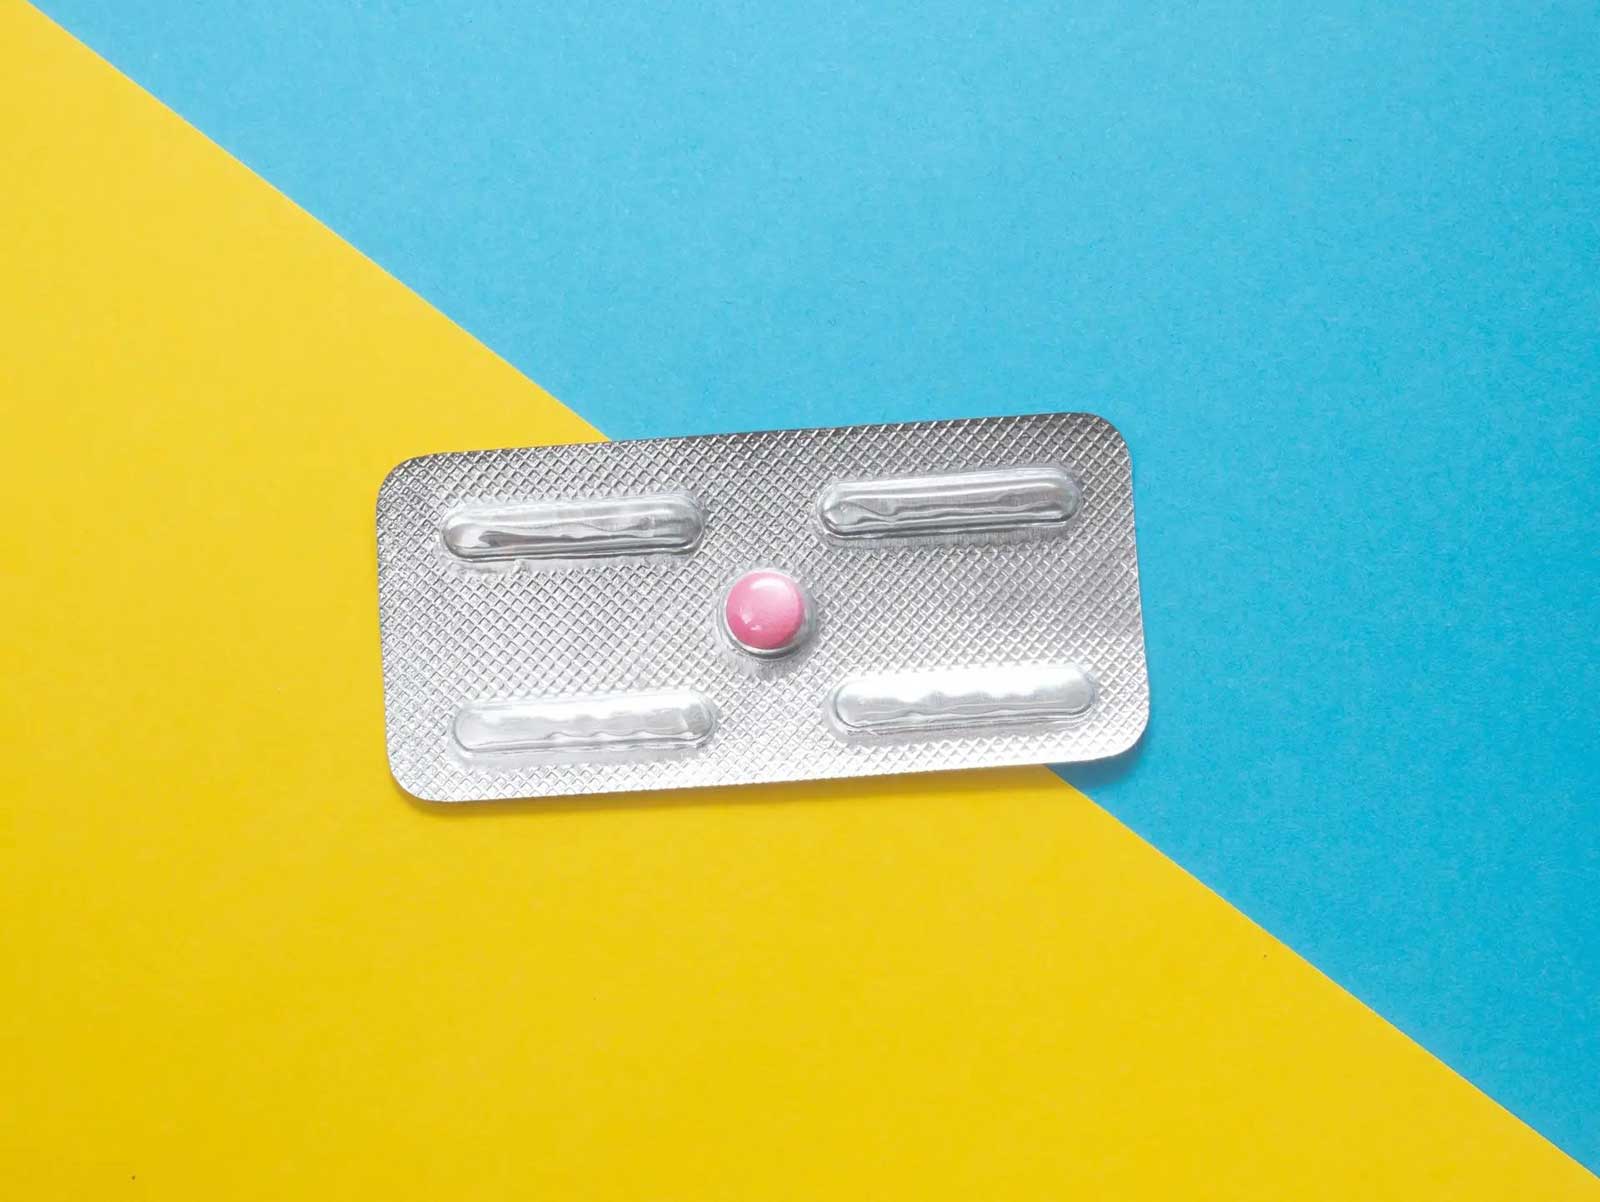 An emergency contraception pill in a foil packet on a blue and yellow background